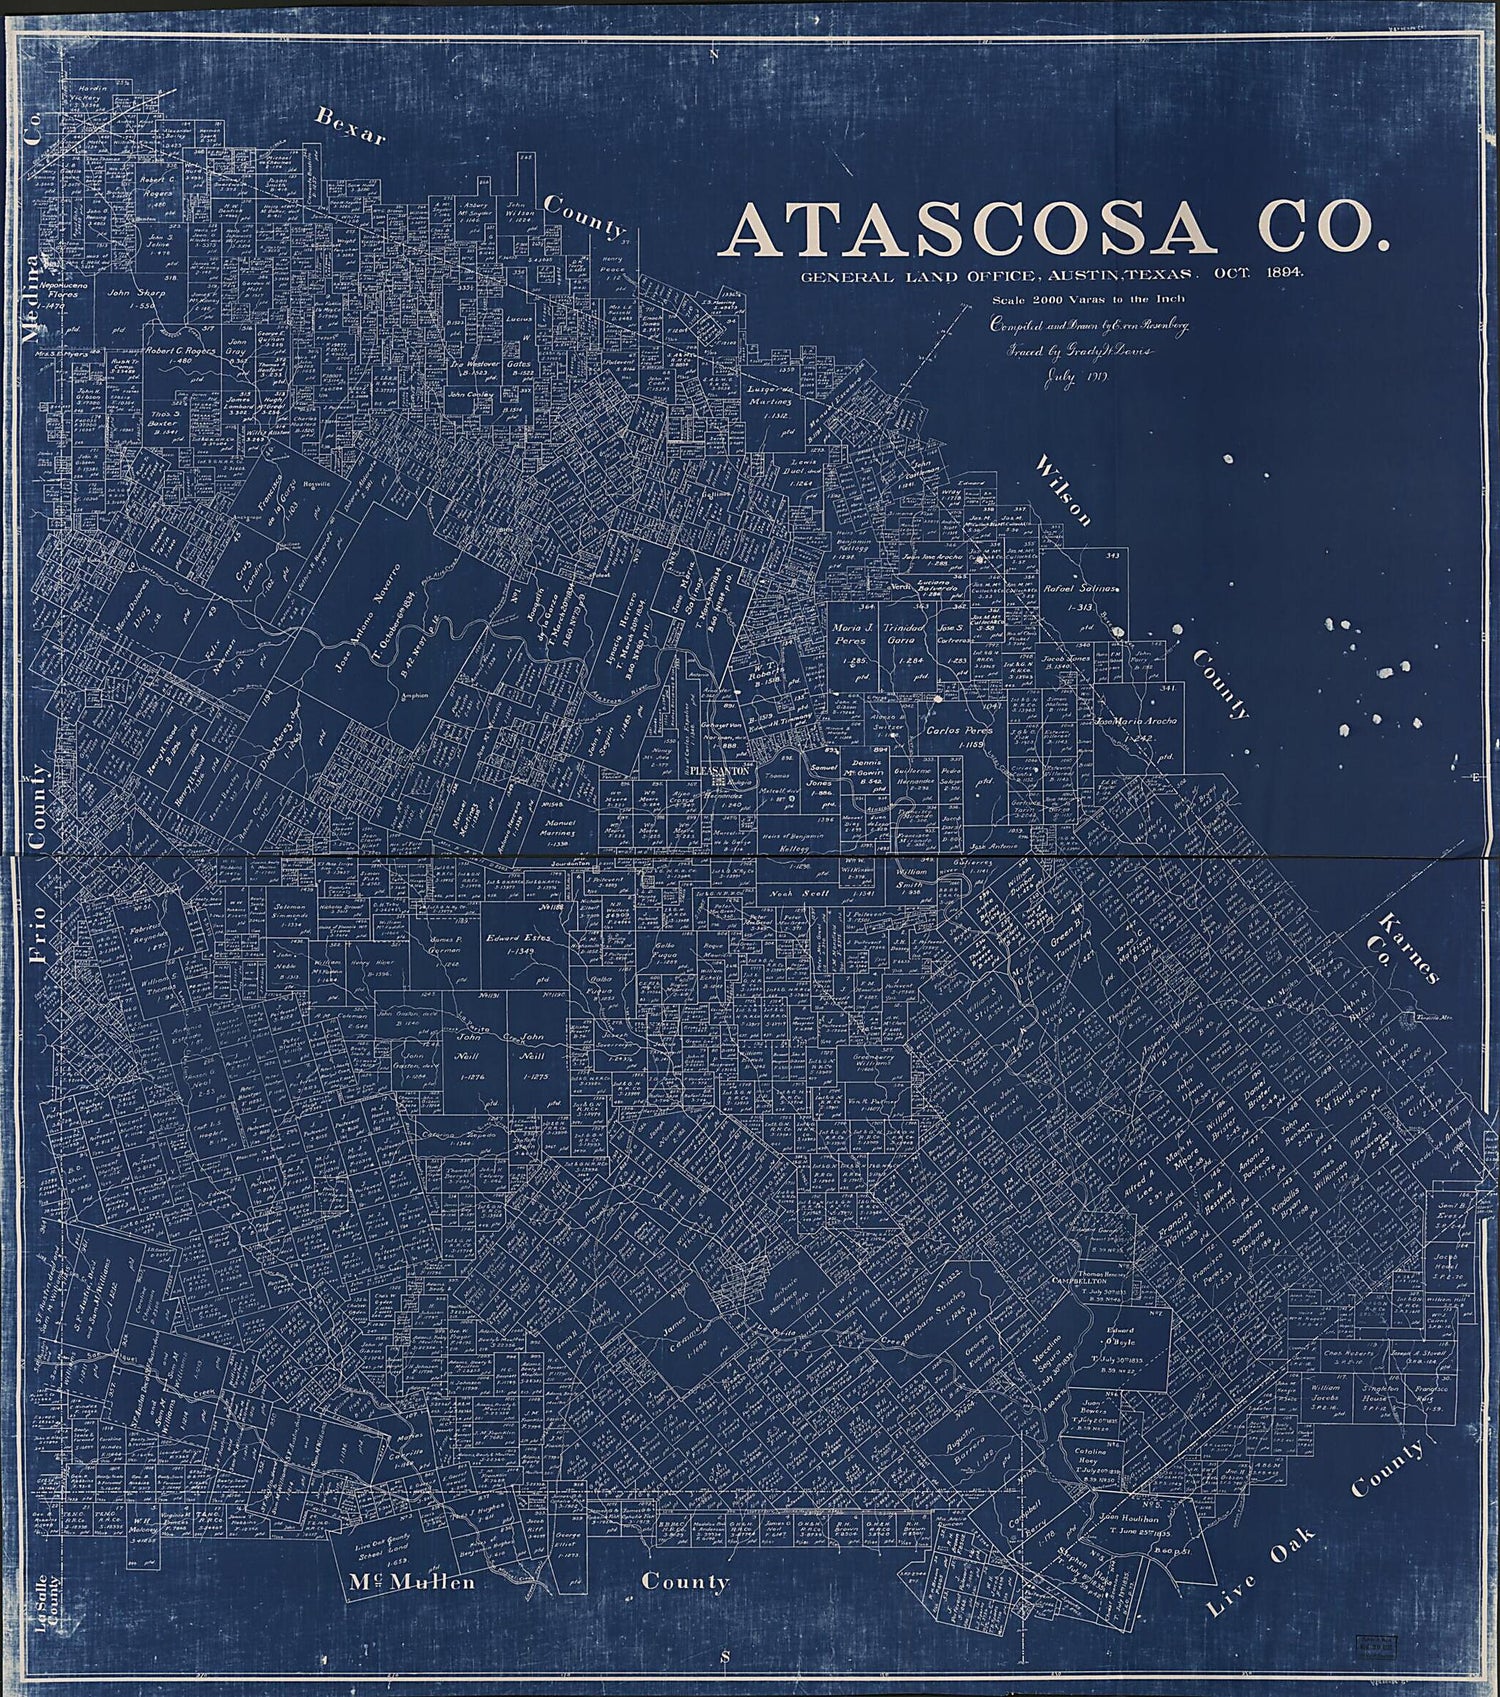 This old map of Atascosa County (Atascosa County) from 1894 was created by E. Von Rosenberg in 1894